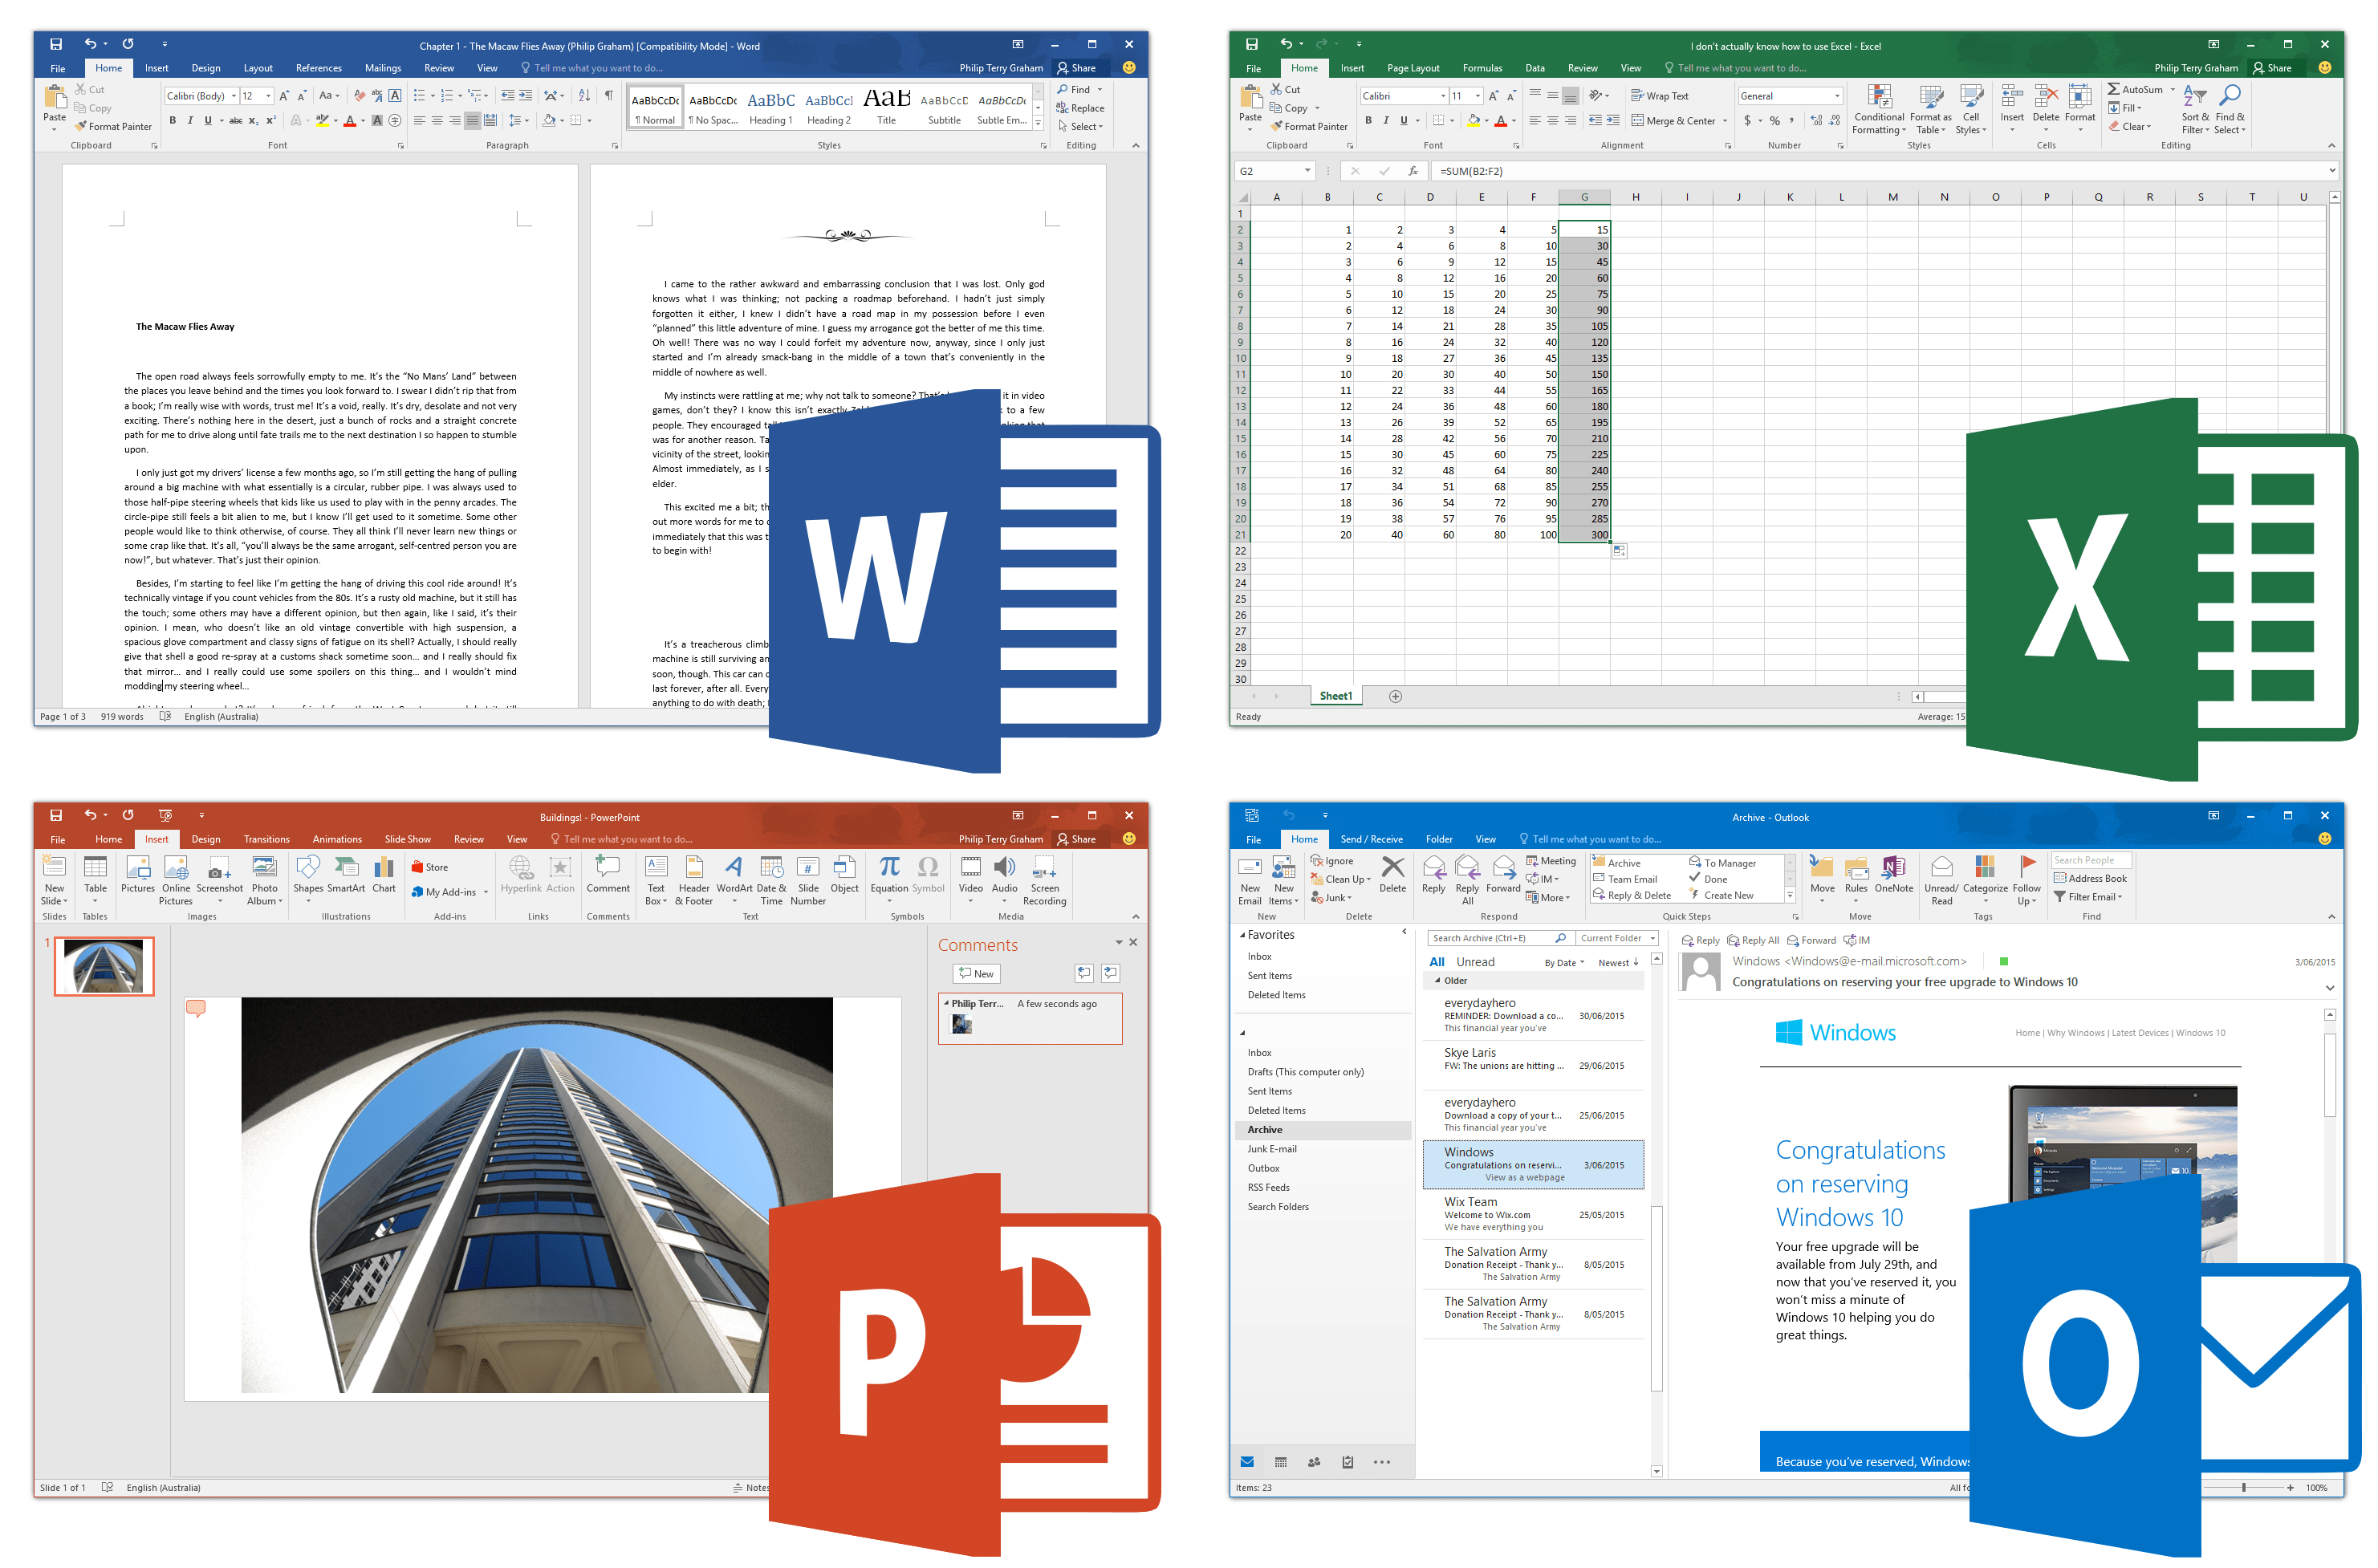 ms office cracked version